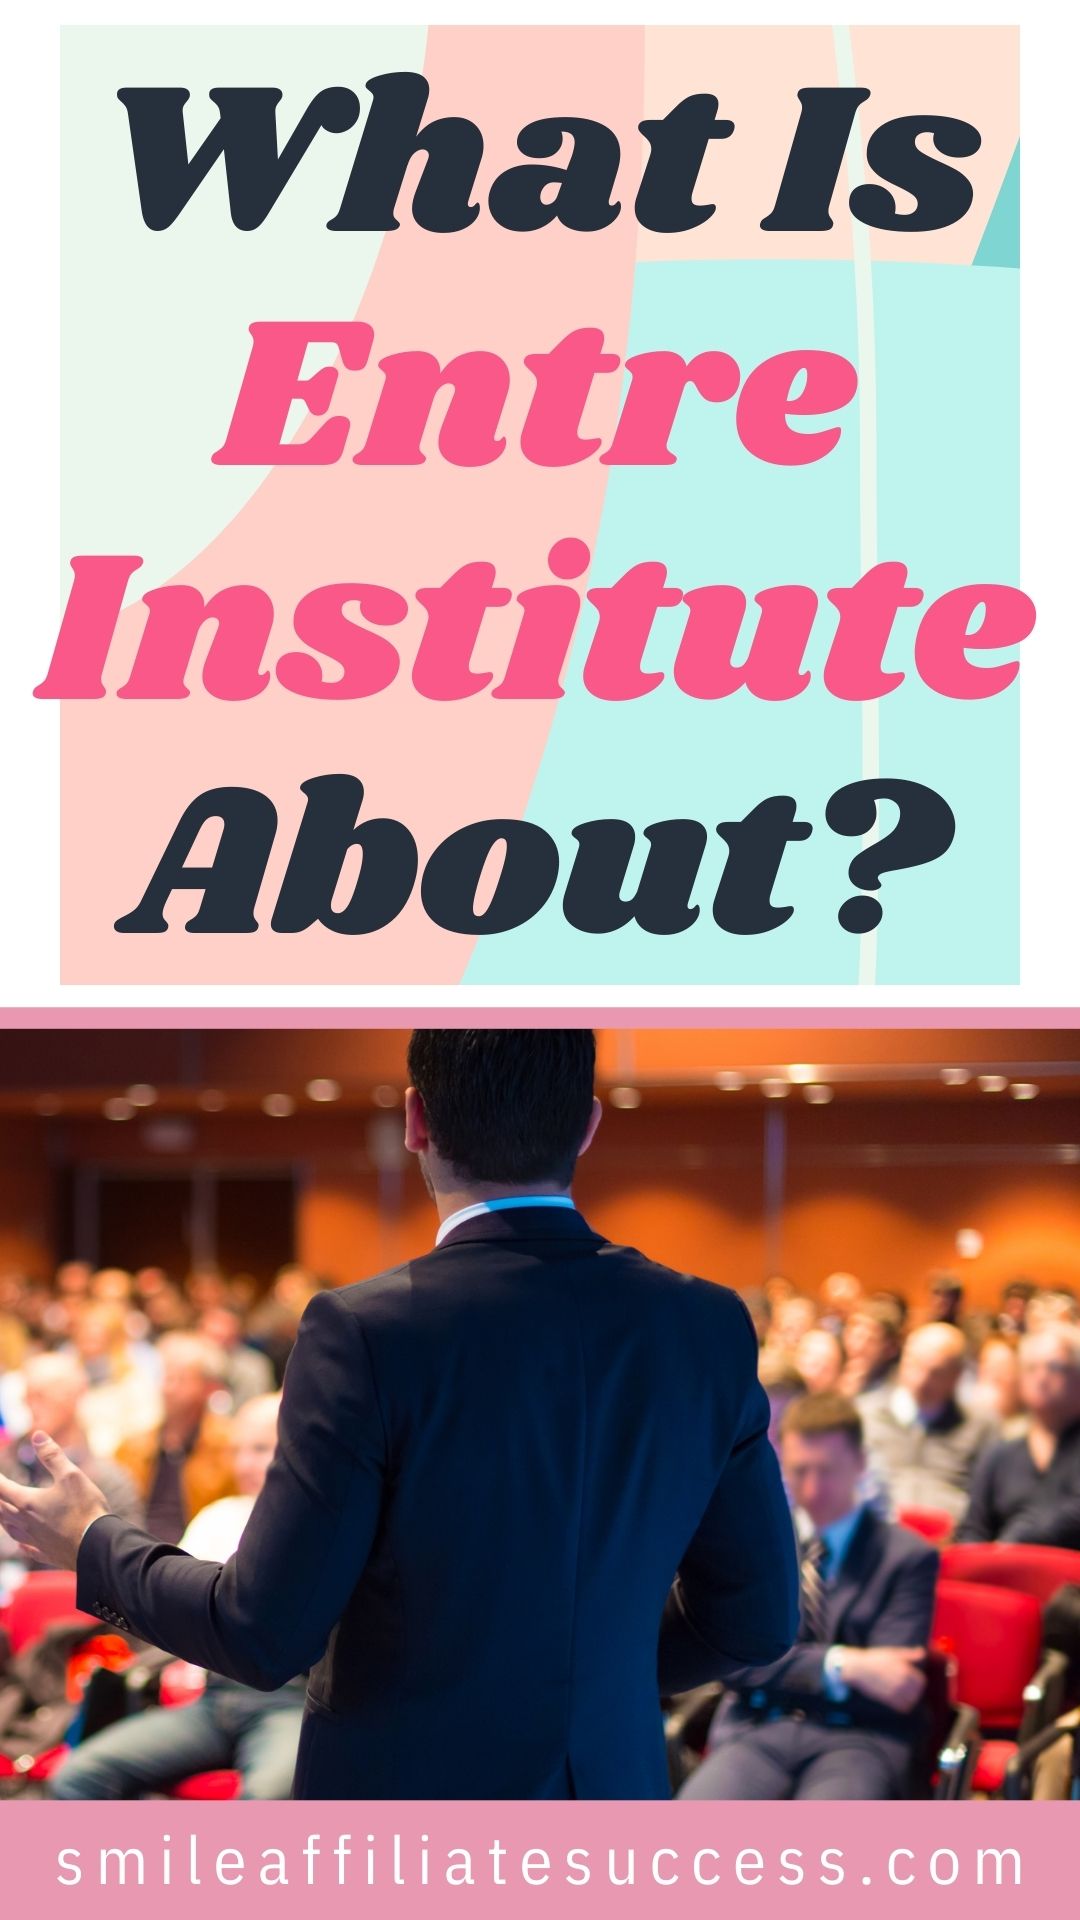 What Is Entre Institute About?